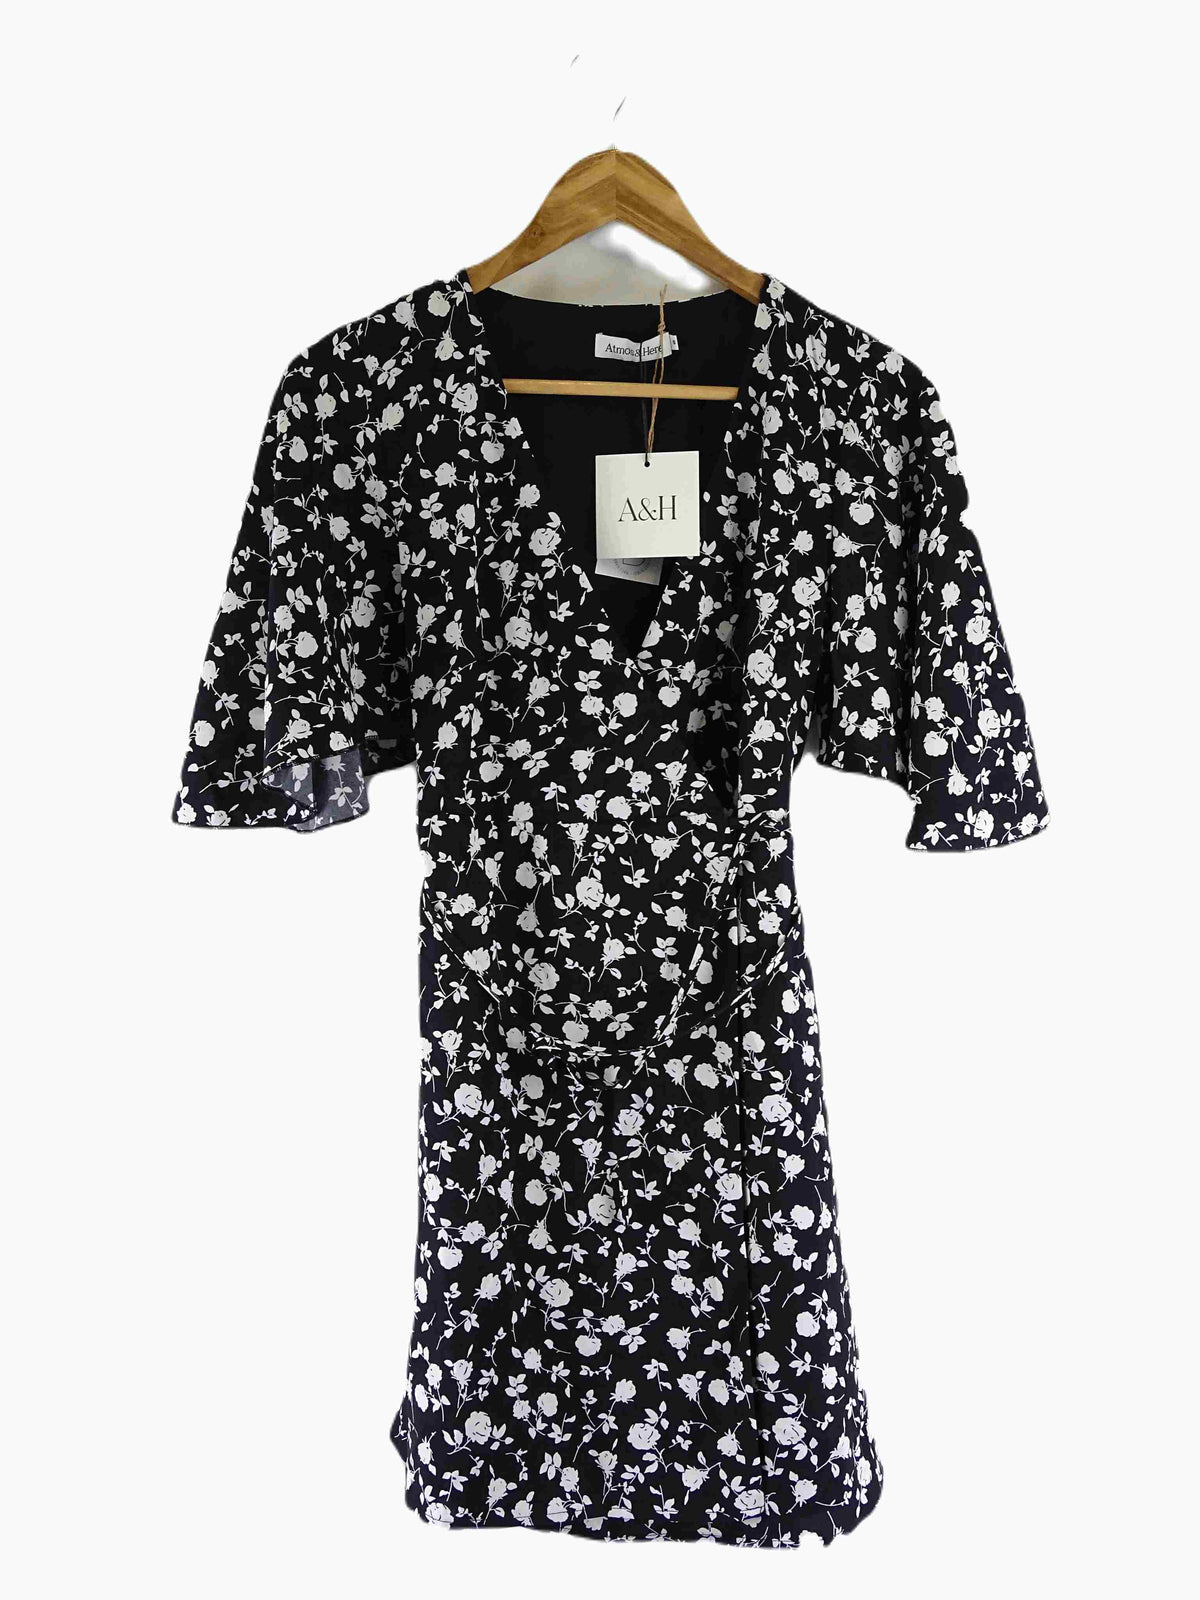 Atmos &amp; Here Black and White Floral Wrap Mini Dress 6